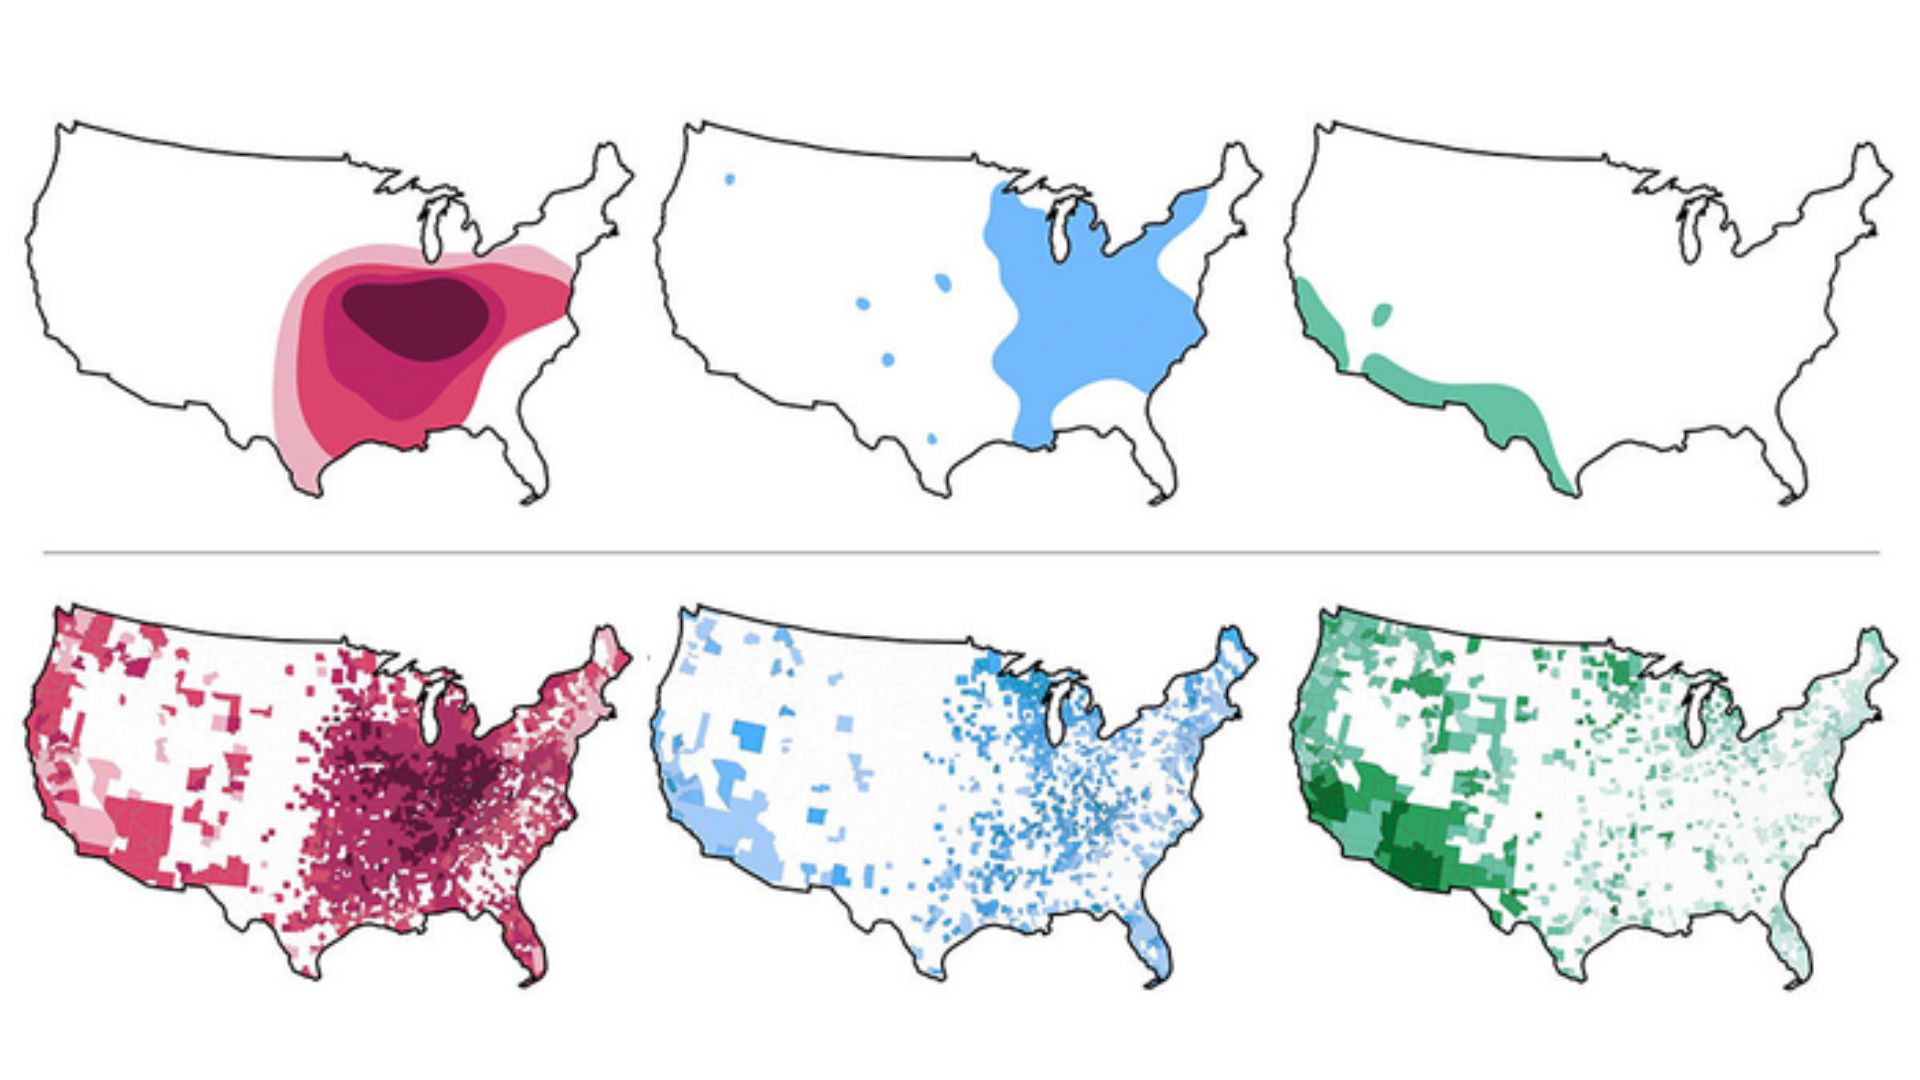 three U.S. maps show how the historic and current distributions of three soil-borne fungi differ now as compared to the 1950s. The fungi are color-coded red, green and blue and each show drastically more coverage in the current maps than previous